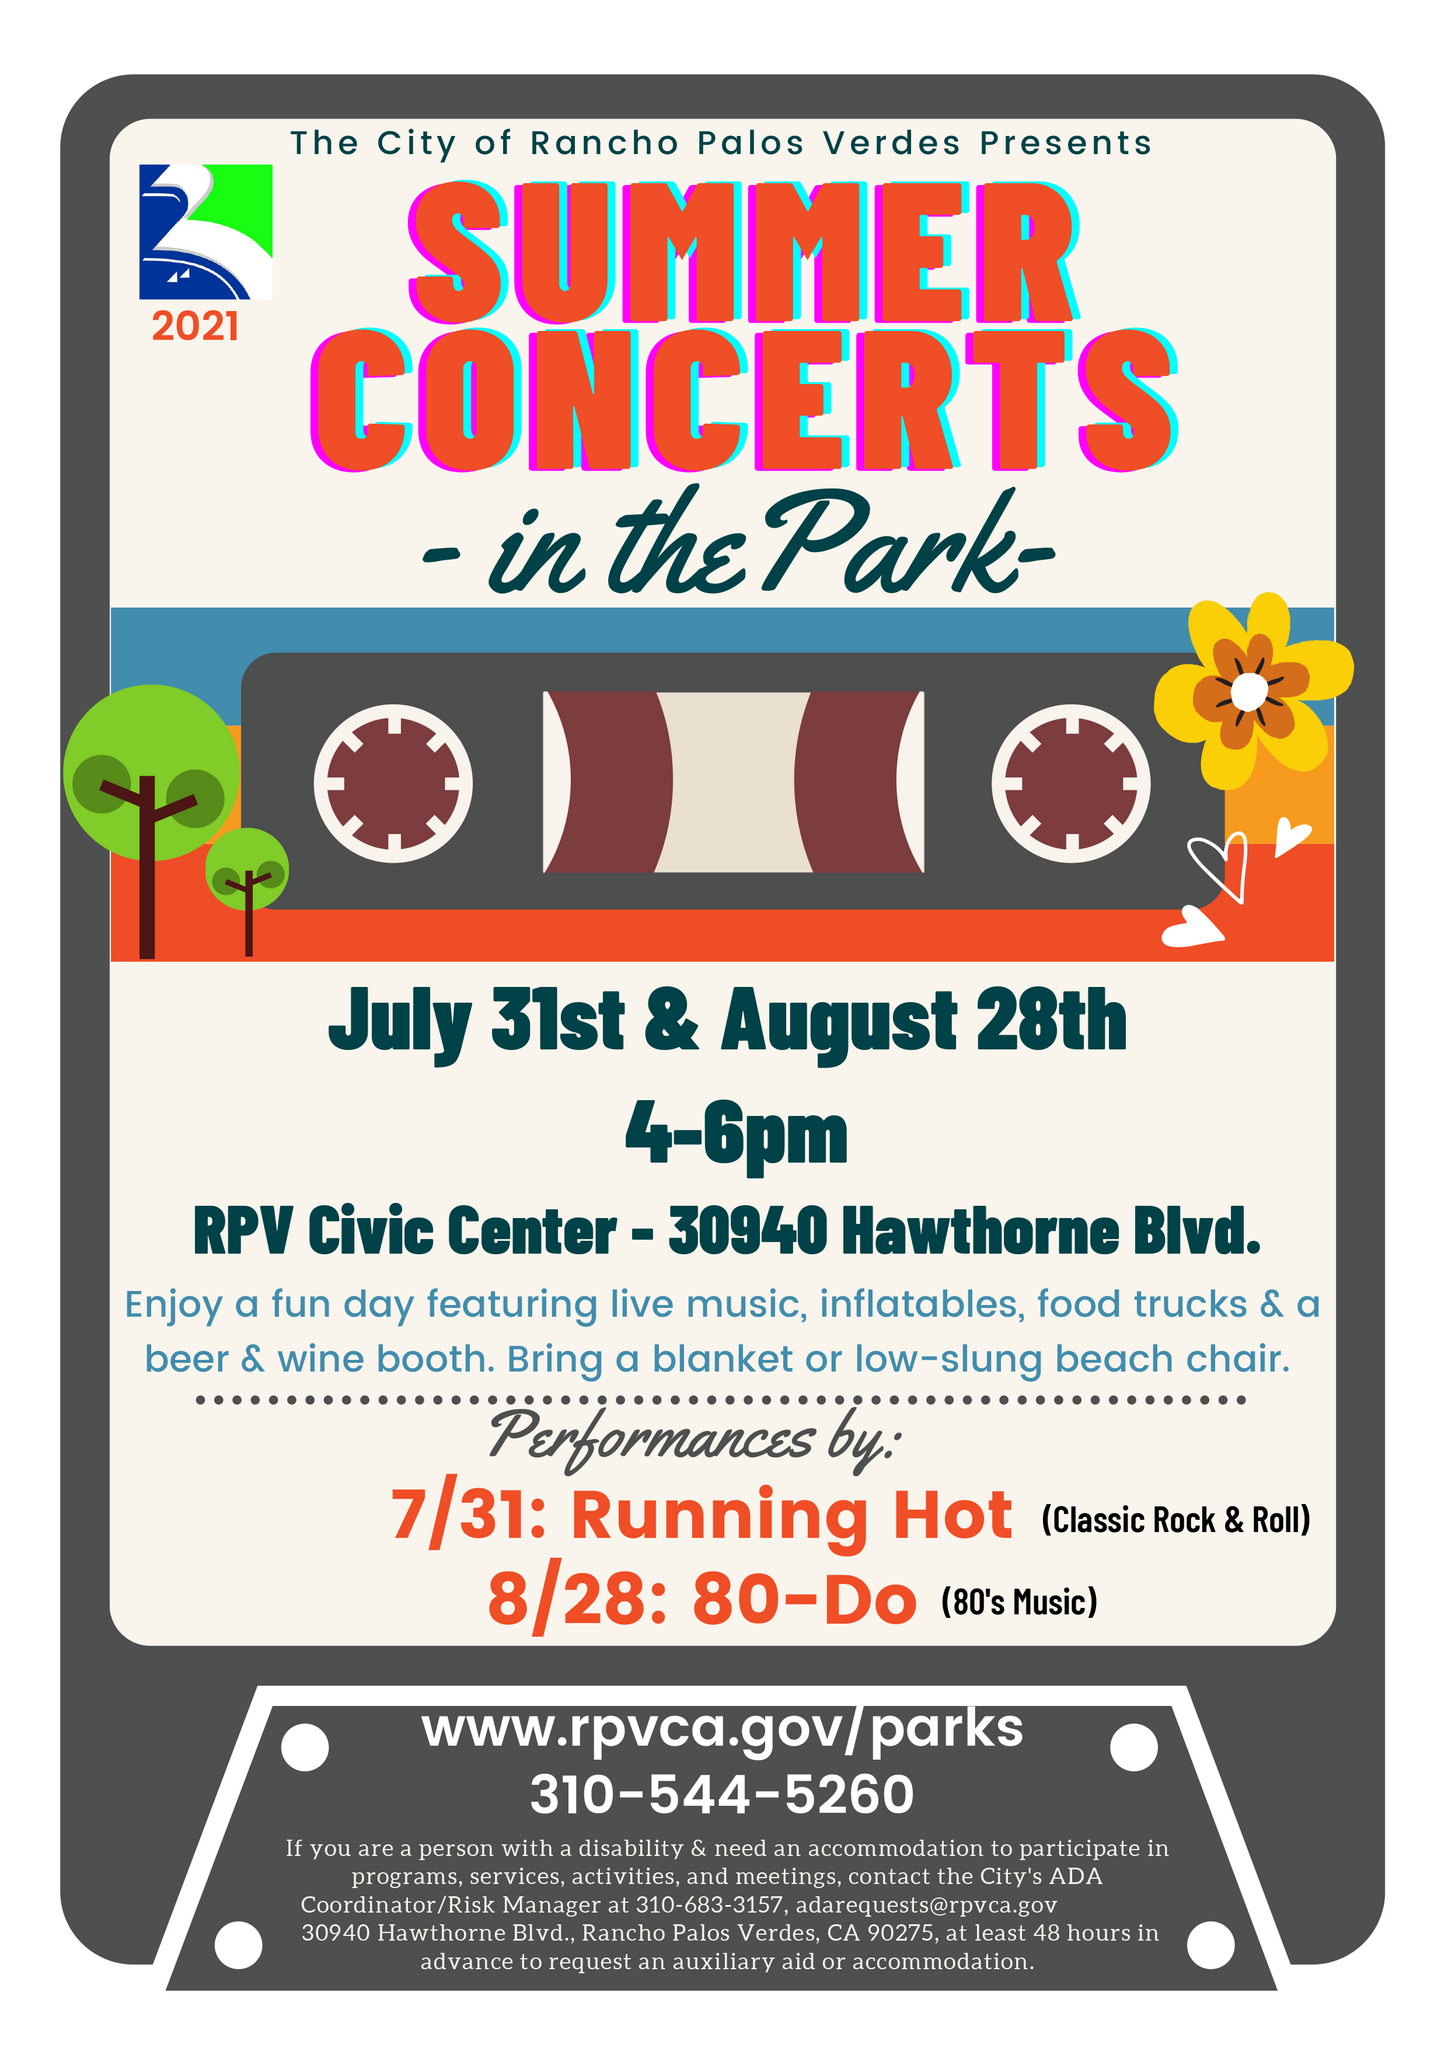 Concert in the Park with 80DO August 28 (City of Rancho Palos Verdes